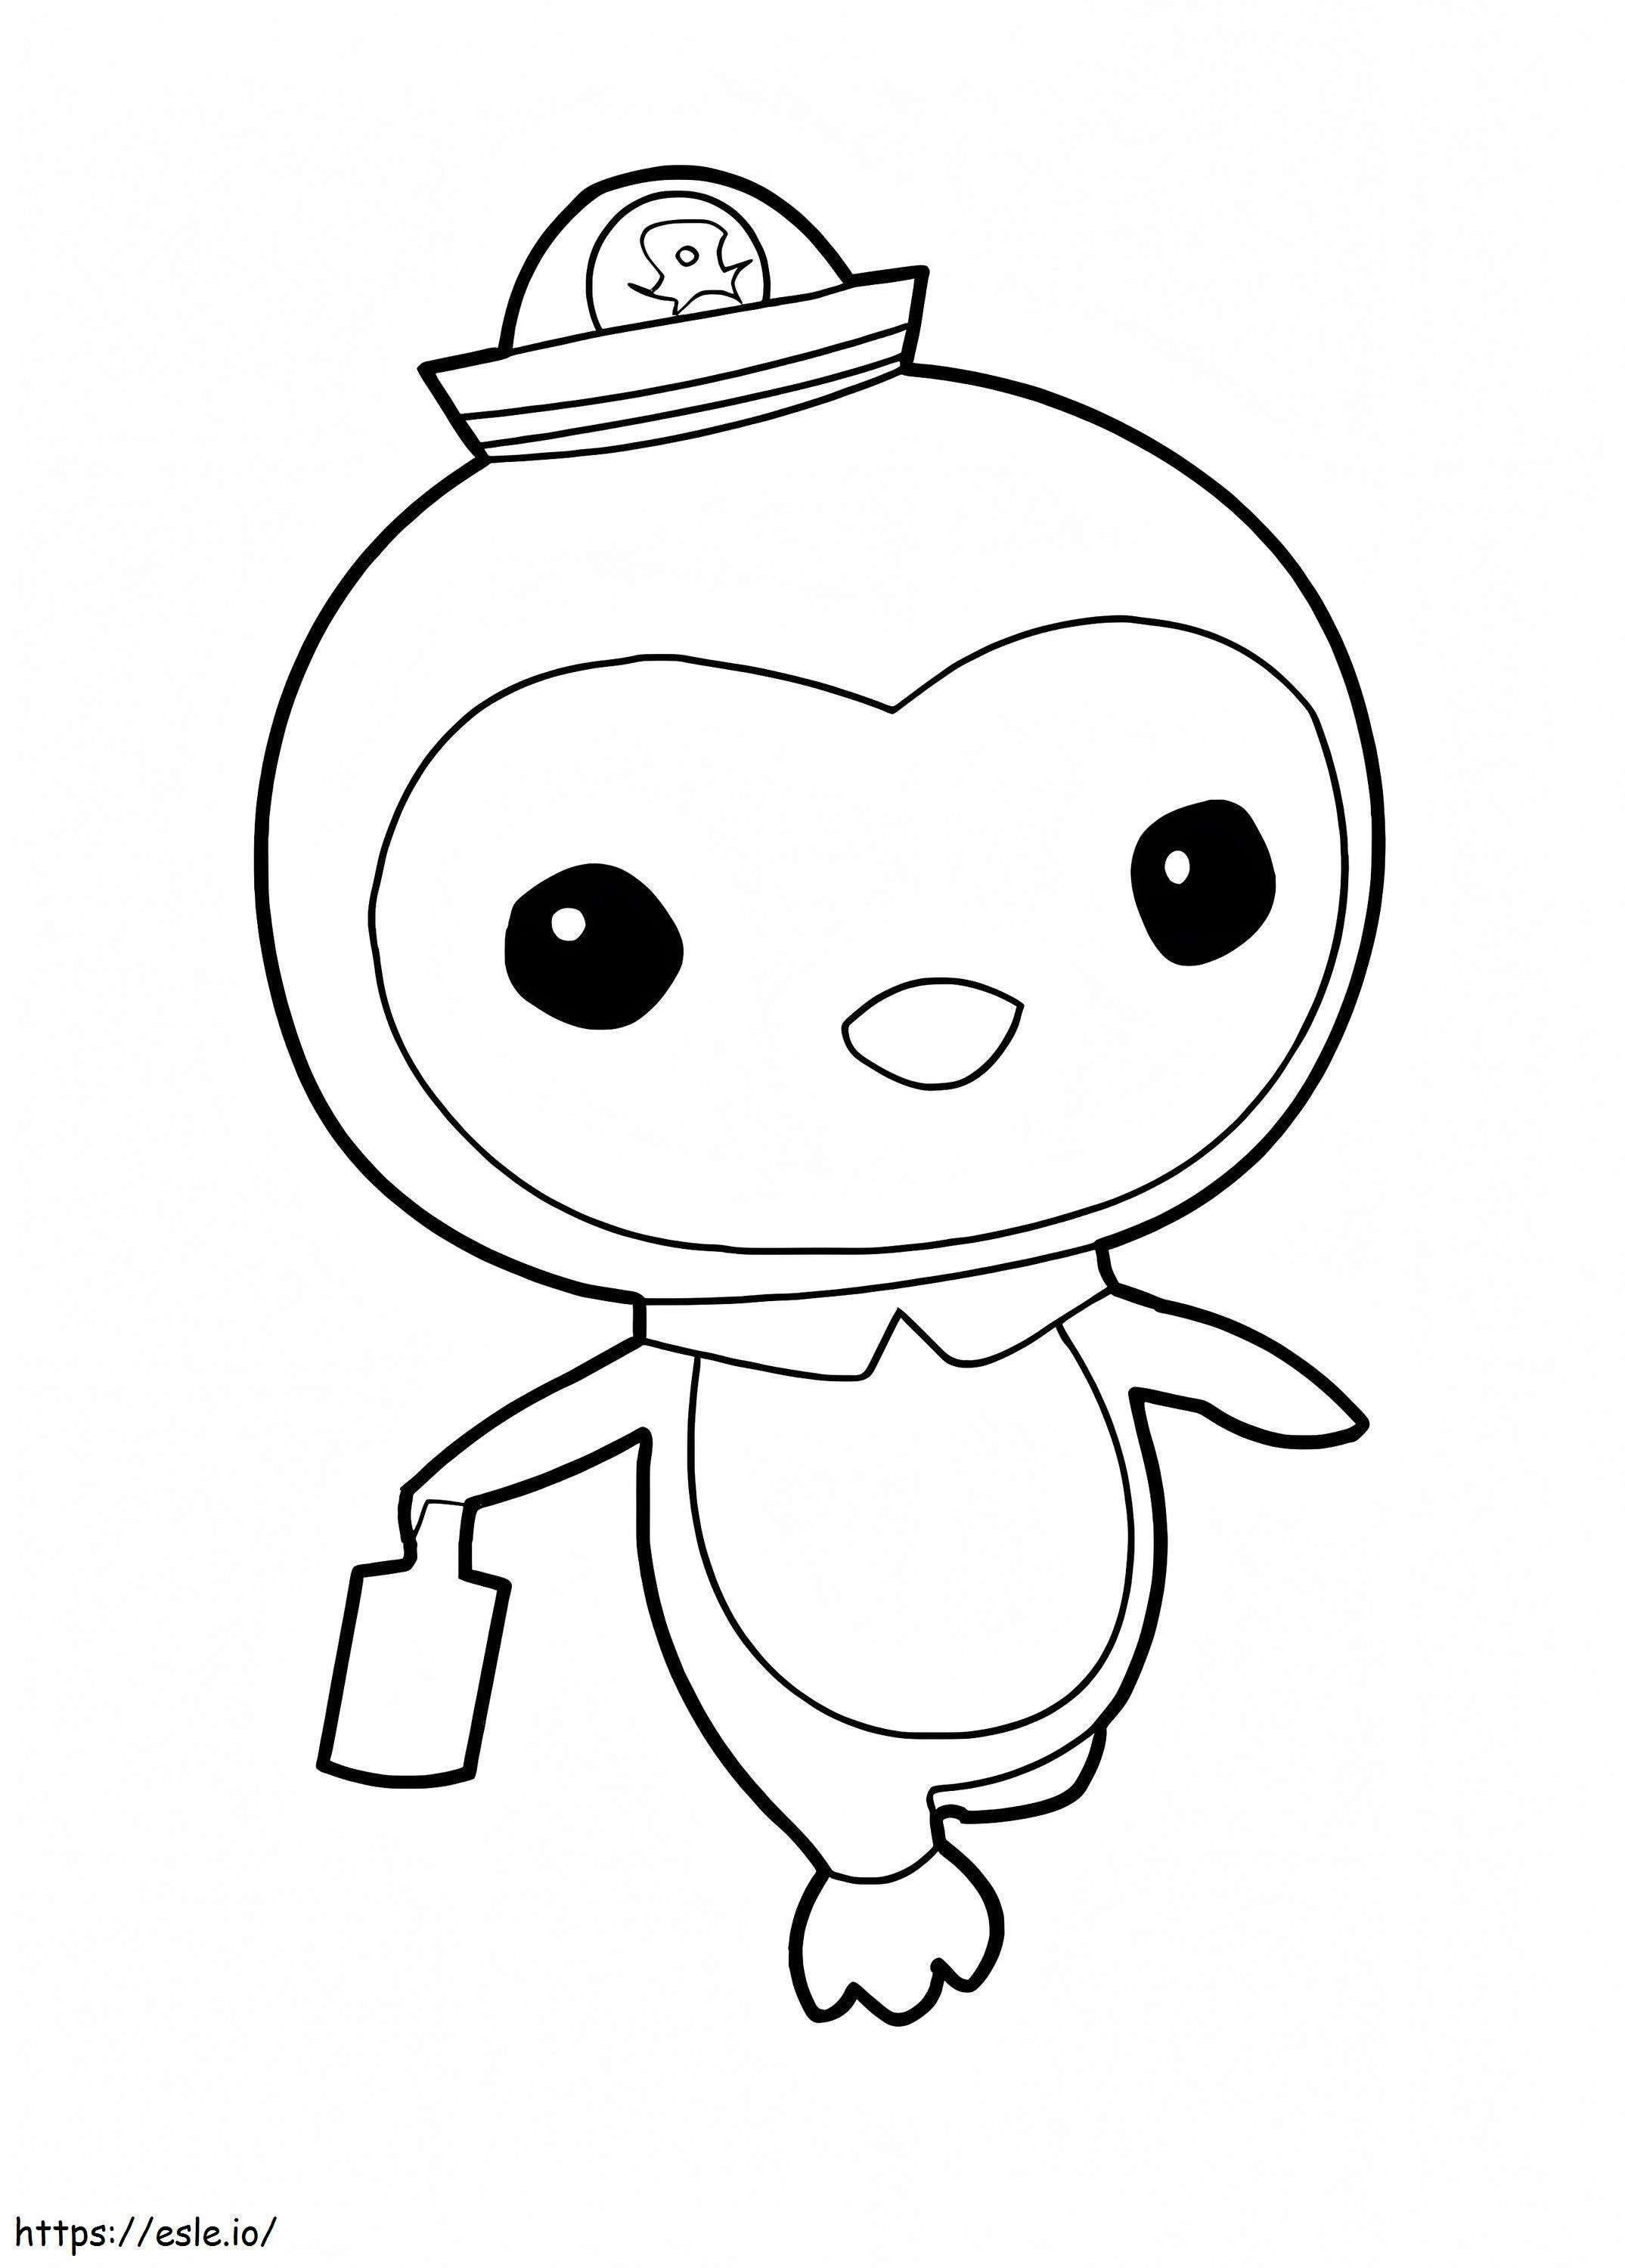 Octonauts Of The Simple Peso coloring page